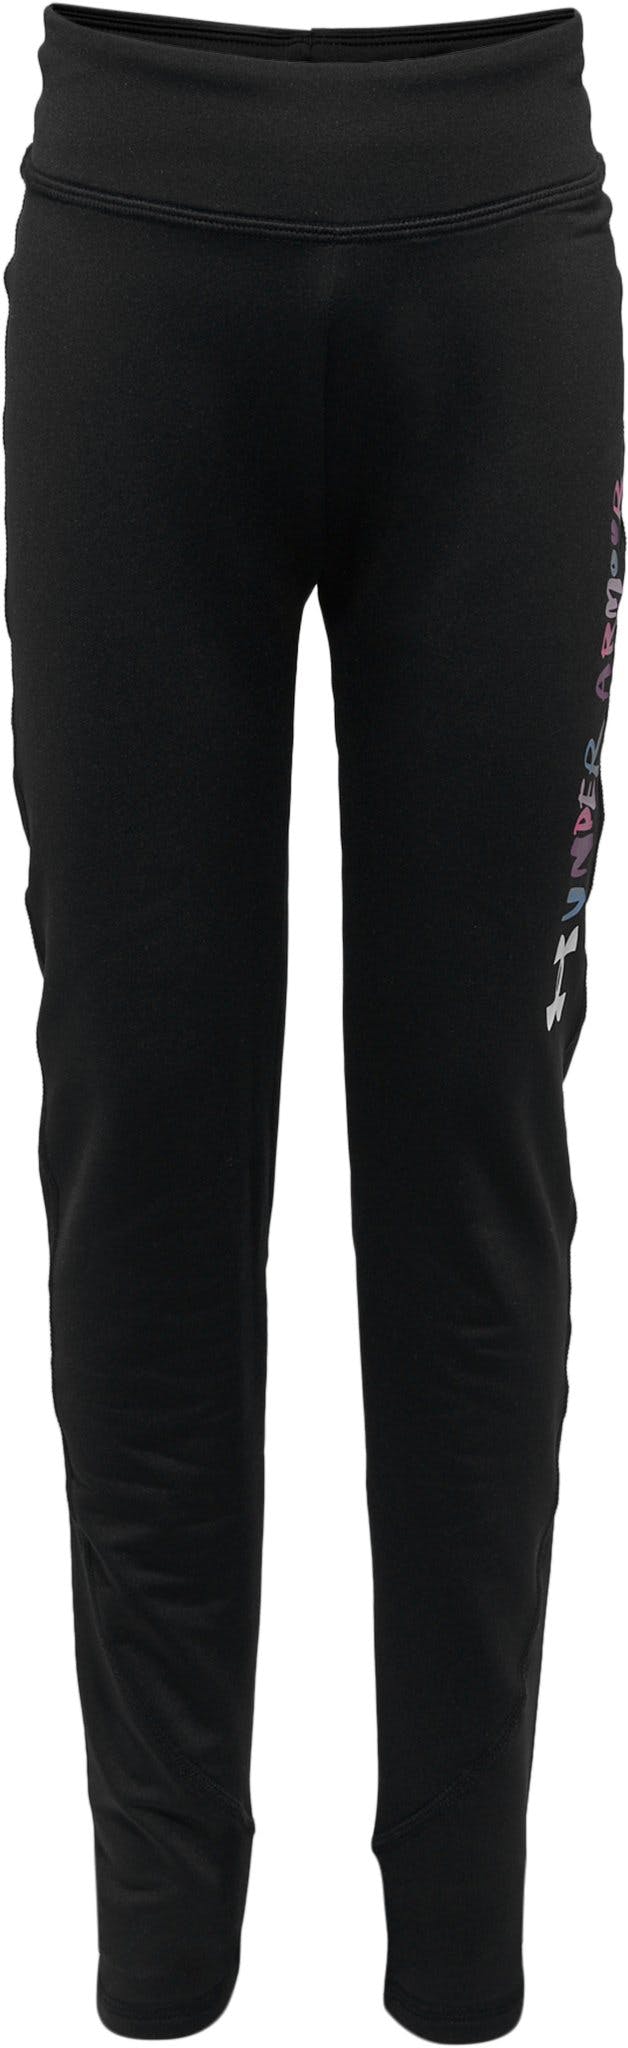 Product image for Cold Weather Leggings - Kids